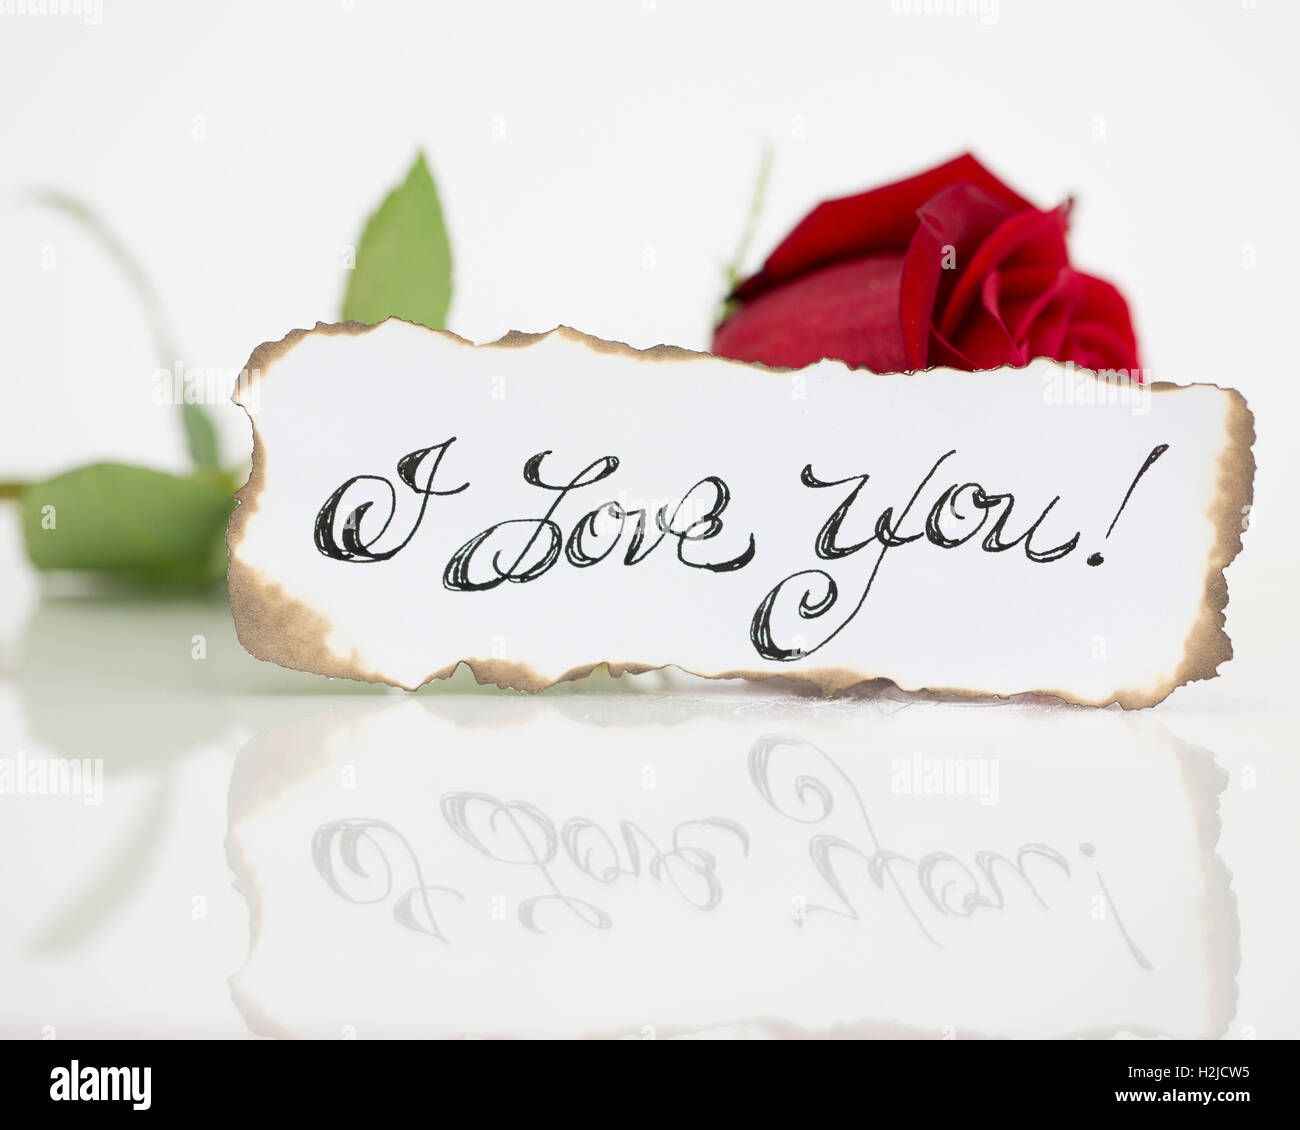 I Love You Message Stock Photo